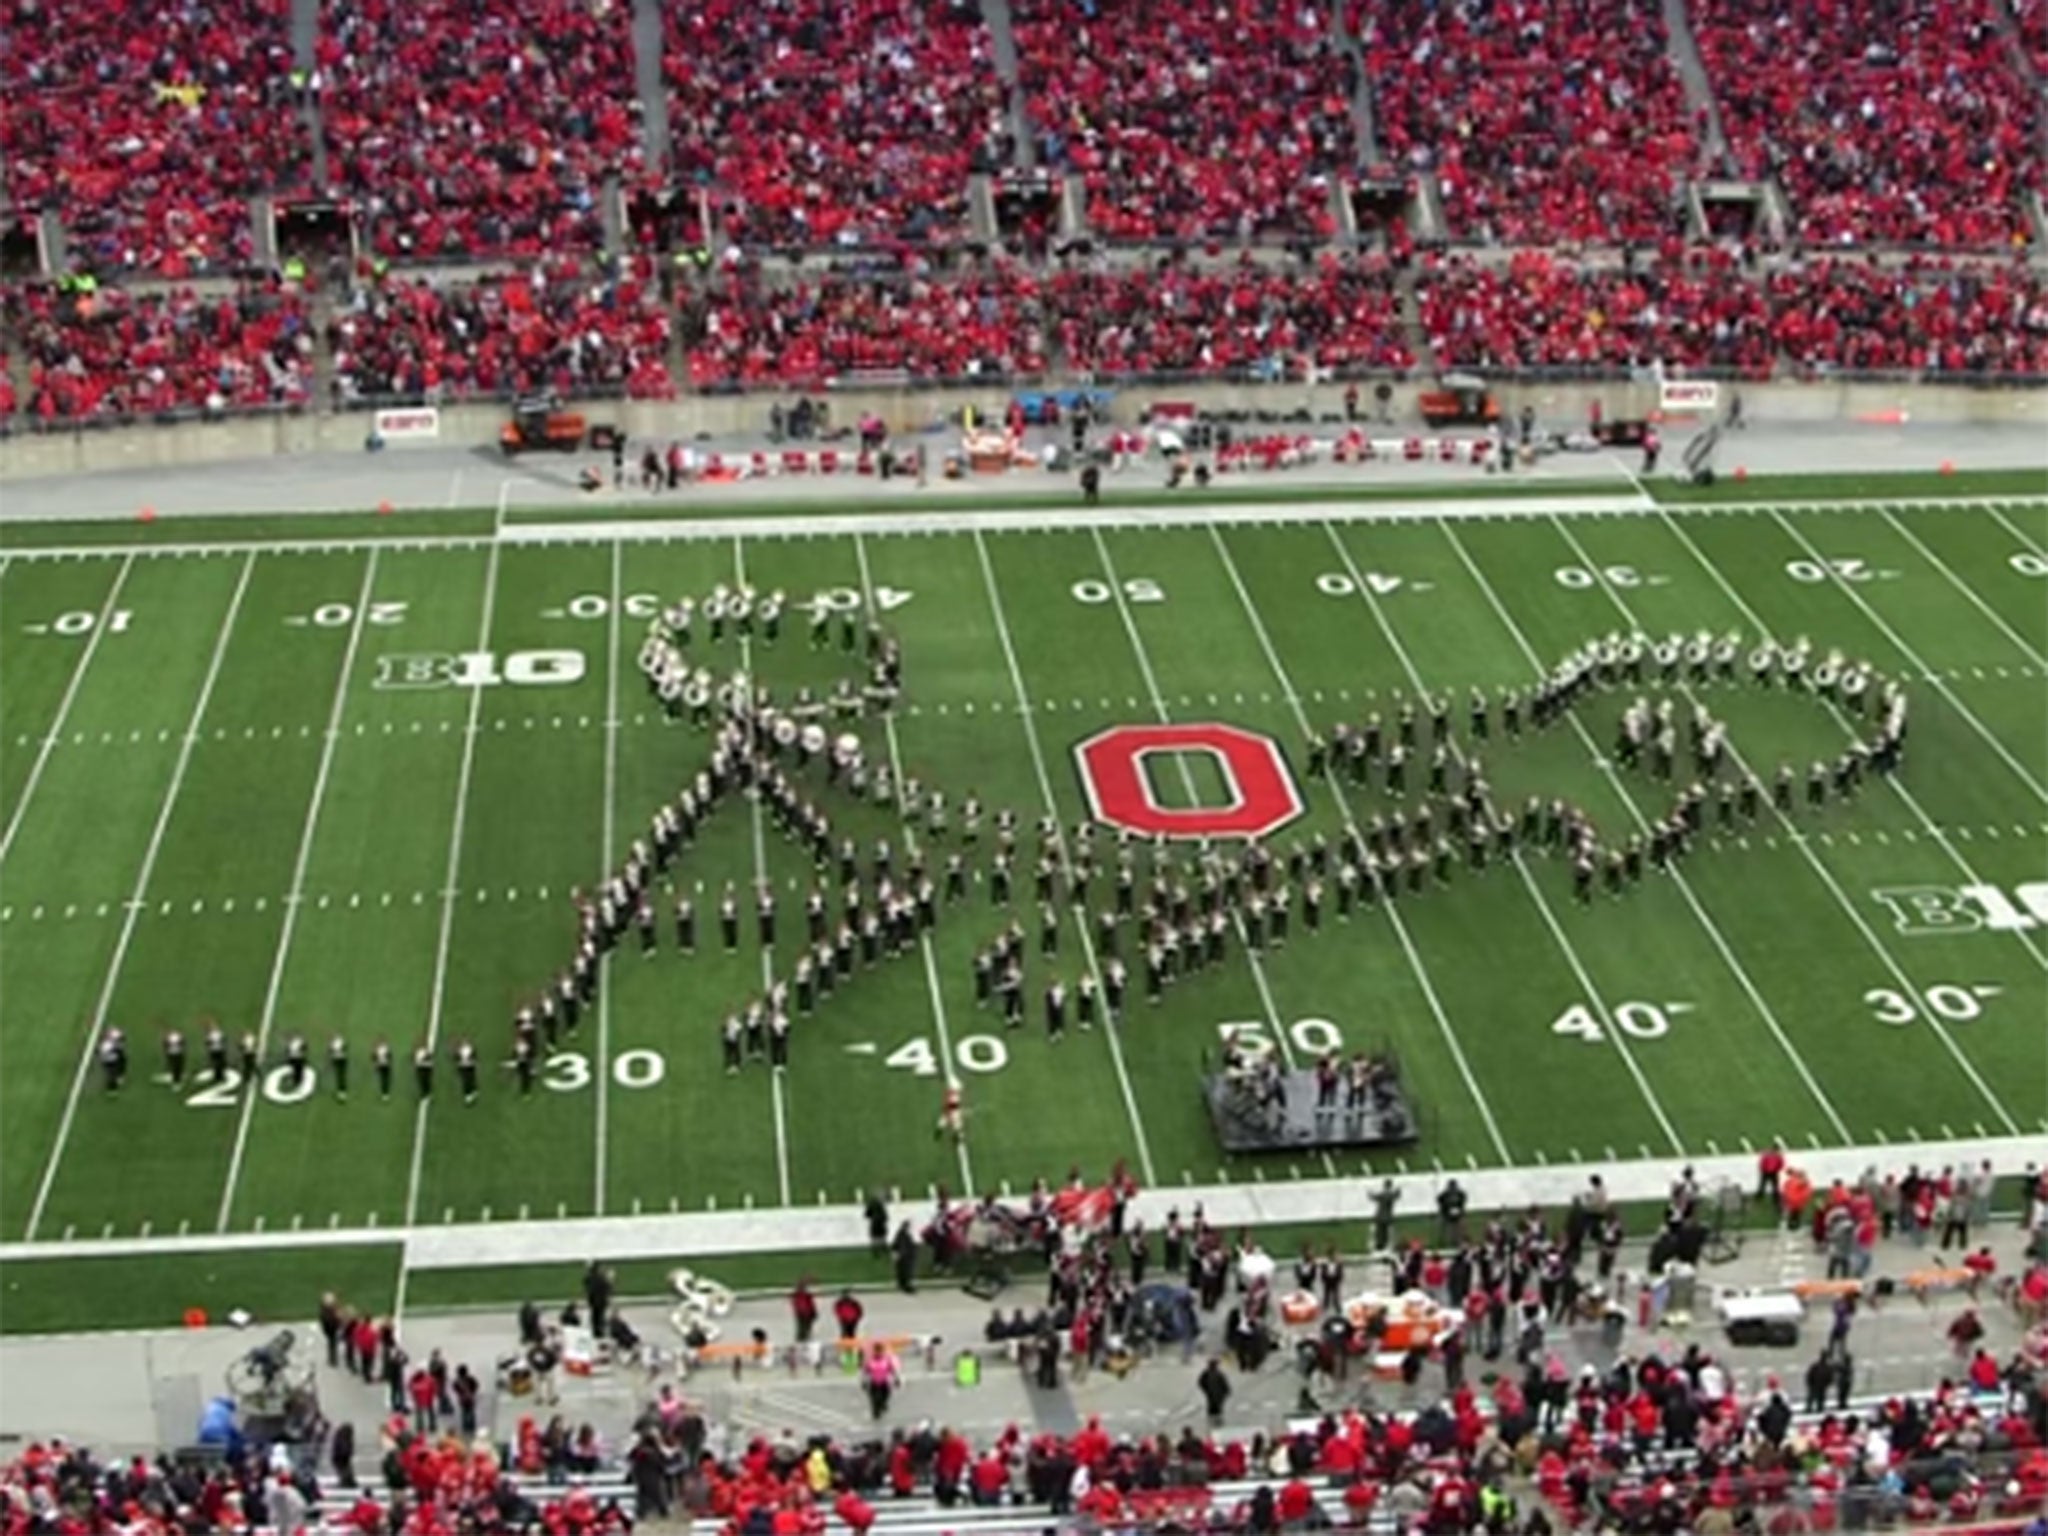 The Ohio State Marching Band are well known for their elaborate performances